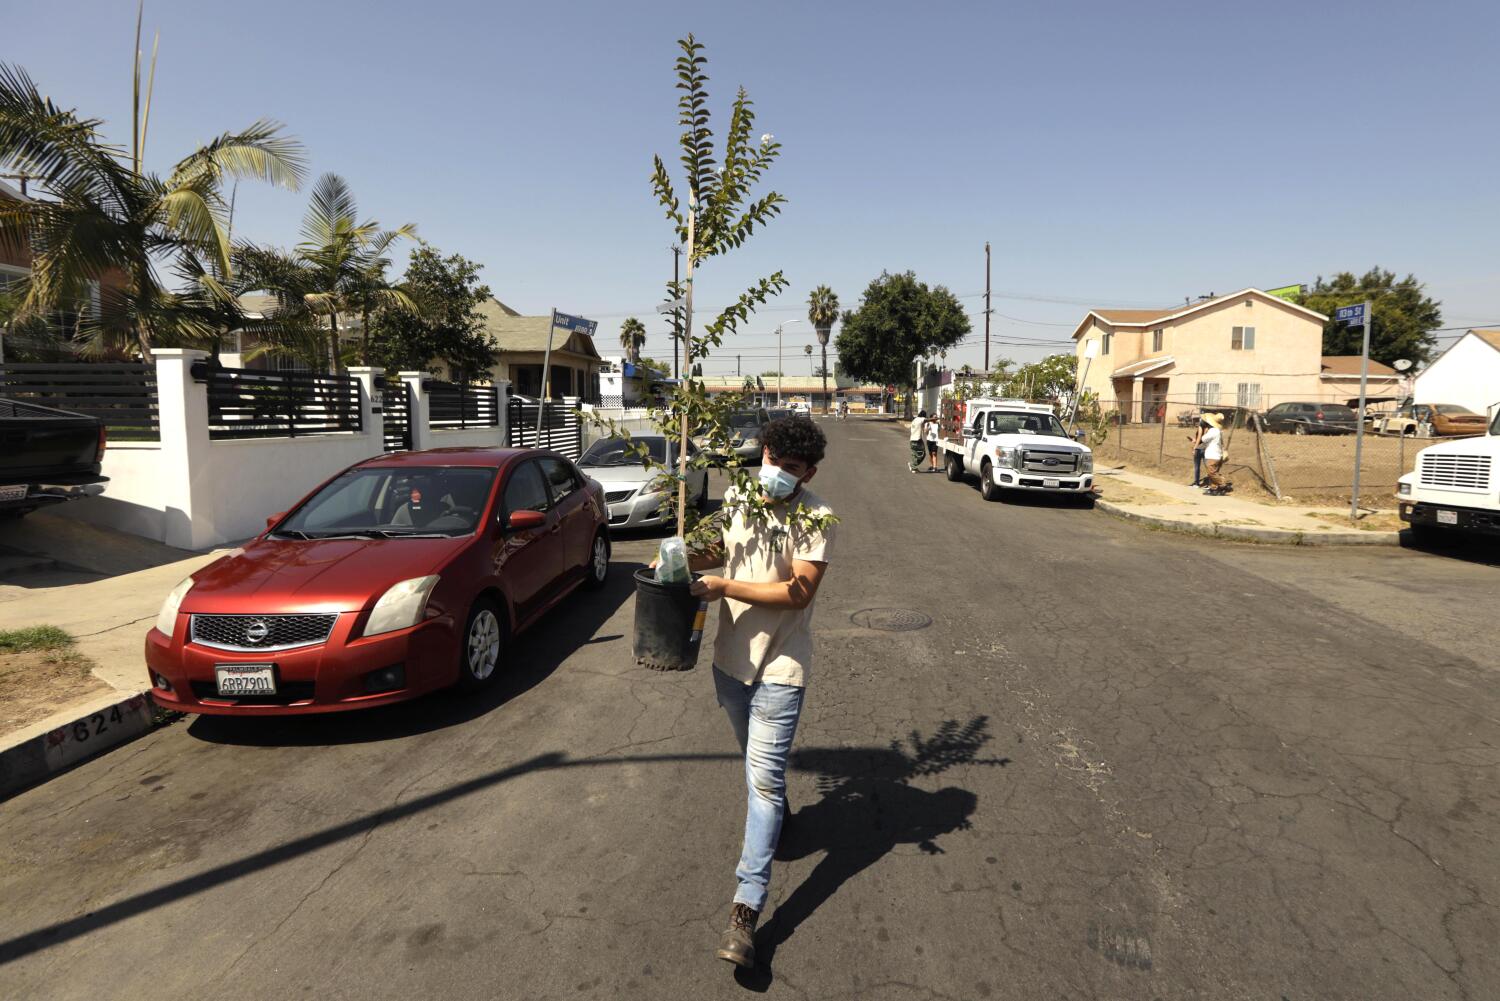 Editorial: Trees are essential in a warming world, but L.A. still lags in shade equity